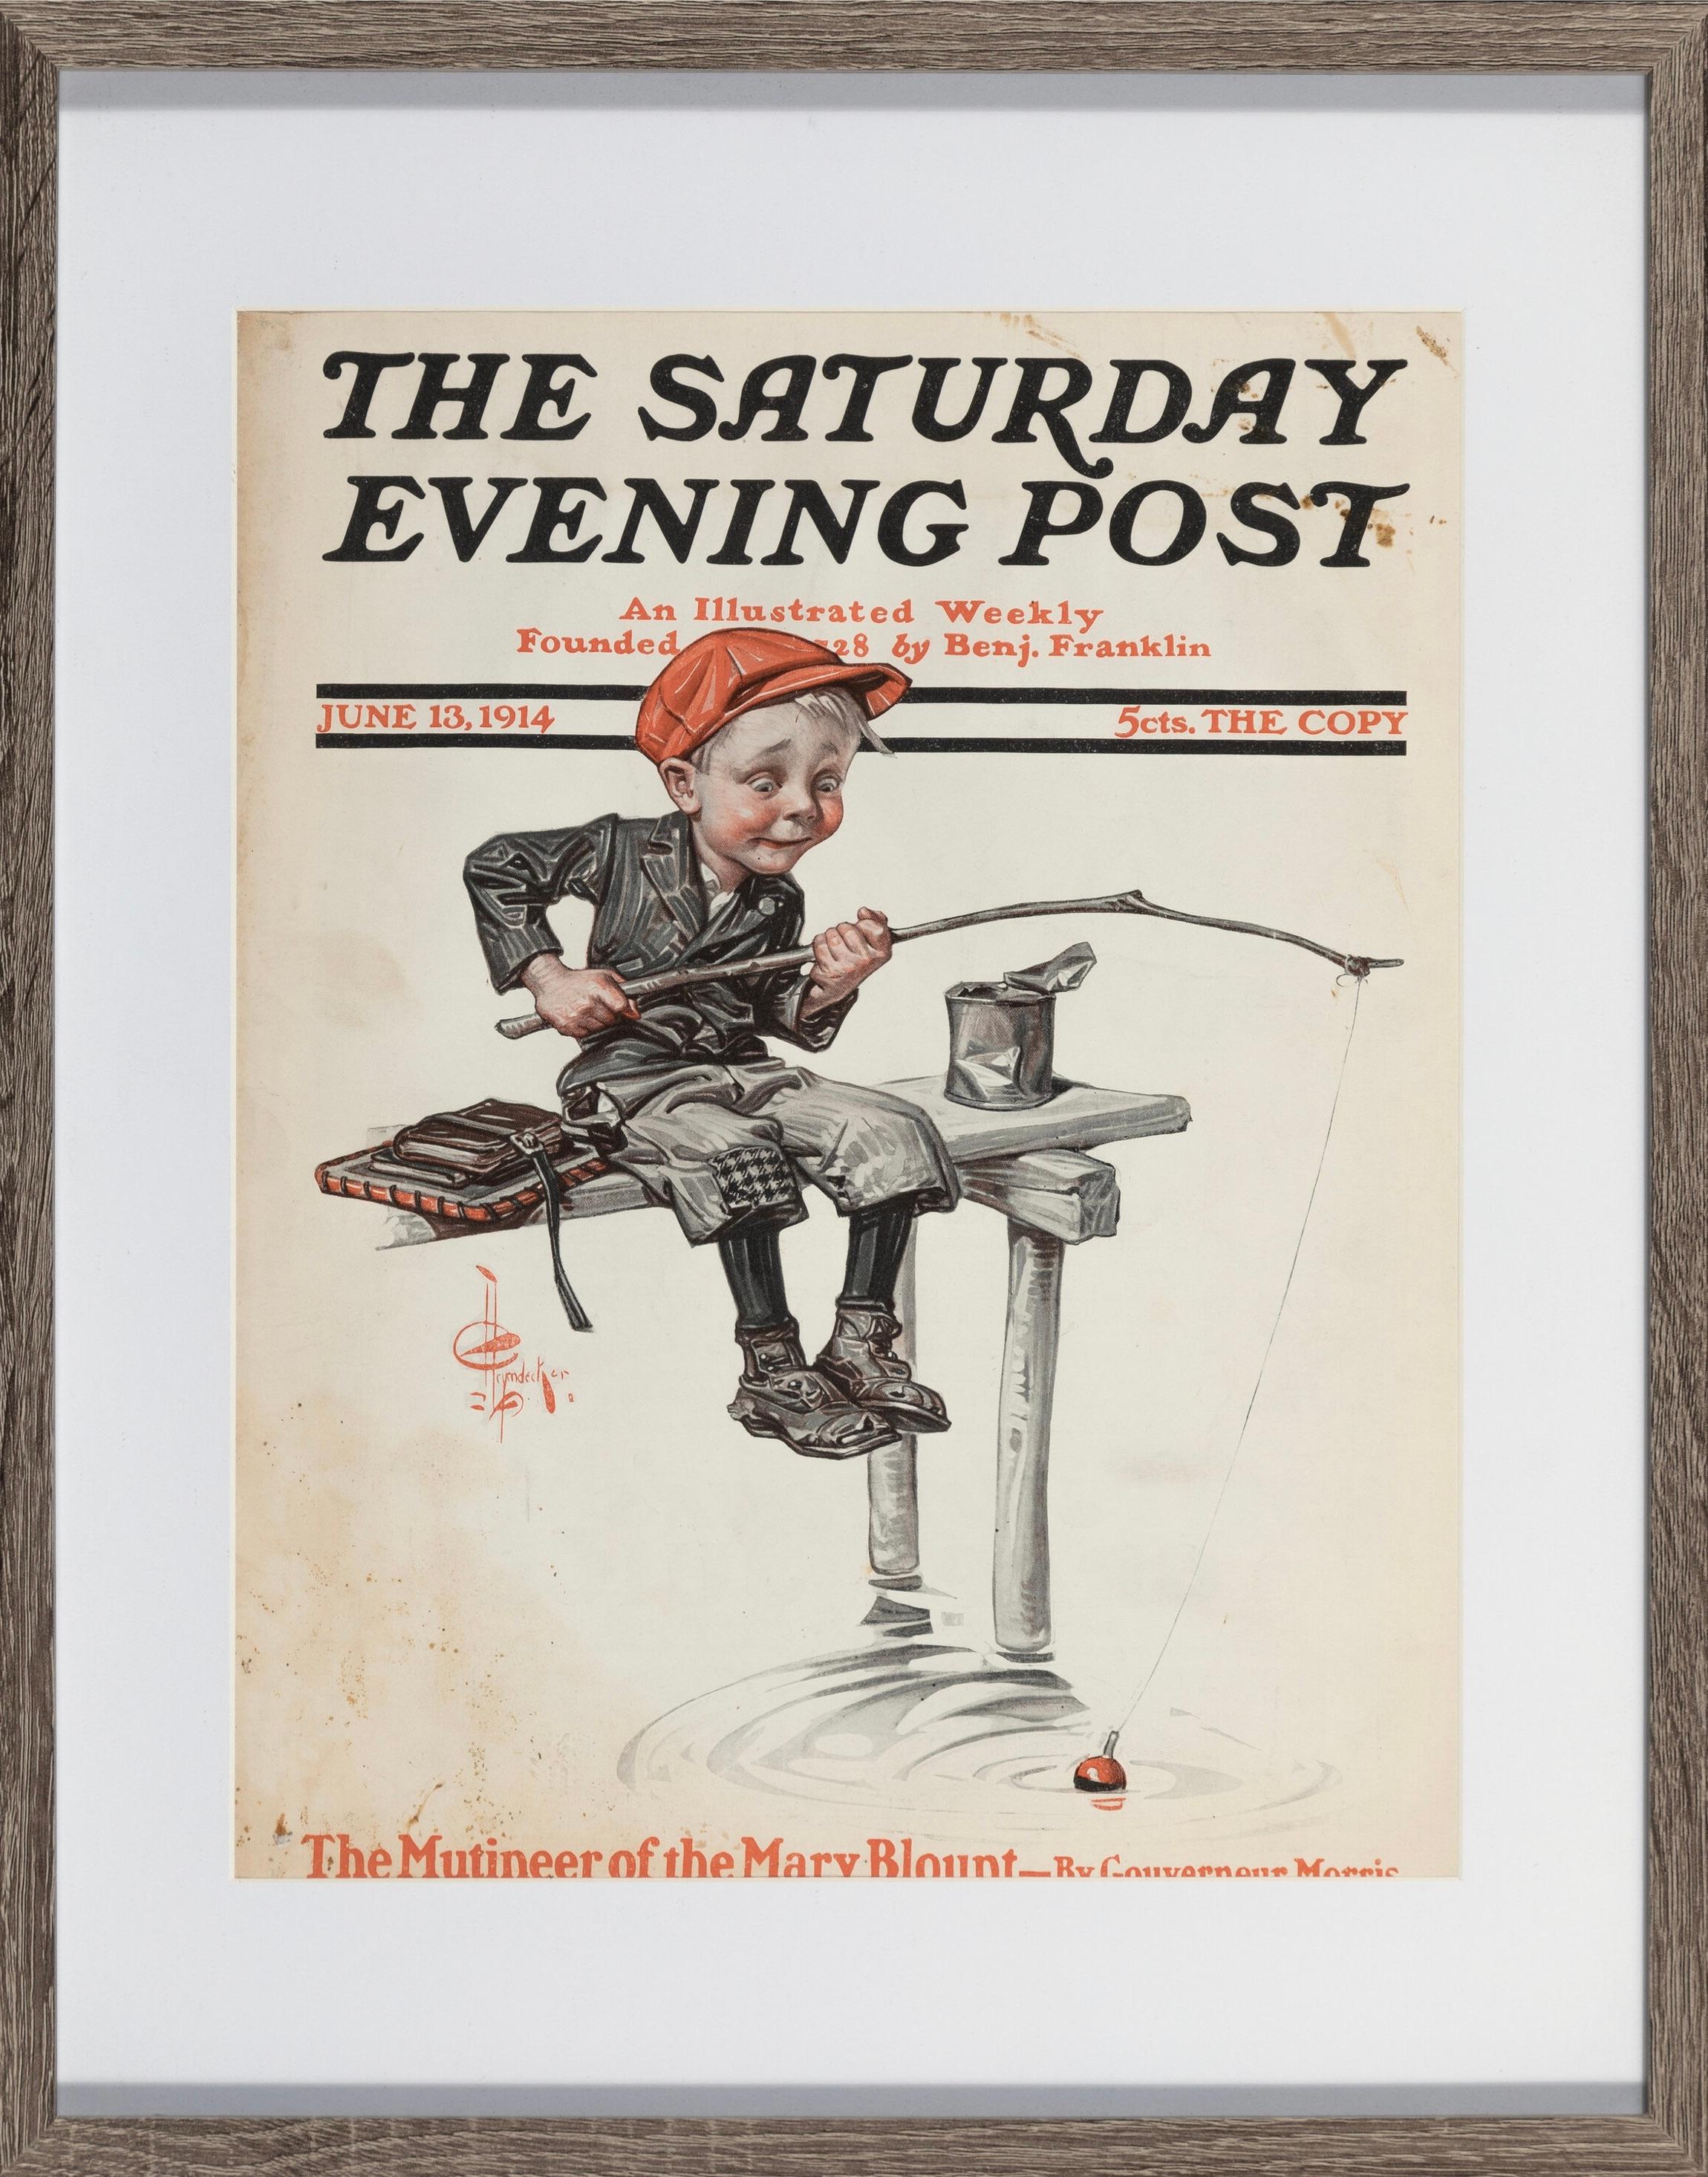 Signed by Artist Signed Lower Center

The Saturday Evening Post cover, June 13, 1914

LITERATURE:
L.S. Cutler and J.G. Cutler, J.C. Leyendecker, American Imagist, New York, 2008, p. 118, illustrated.



A gifted and inimitable draughtsman, Joseph